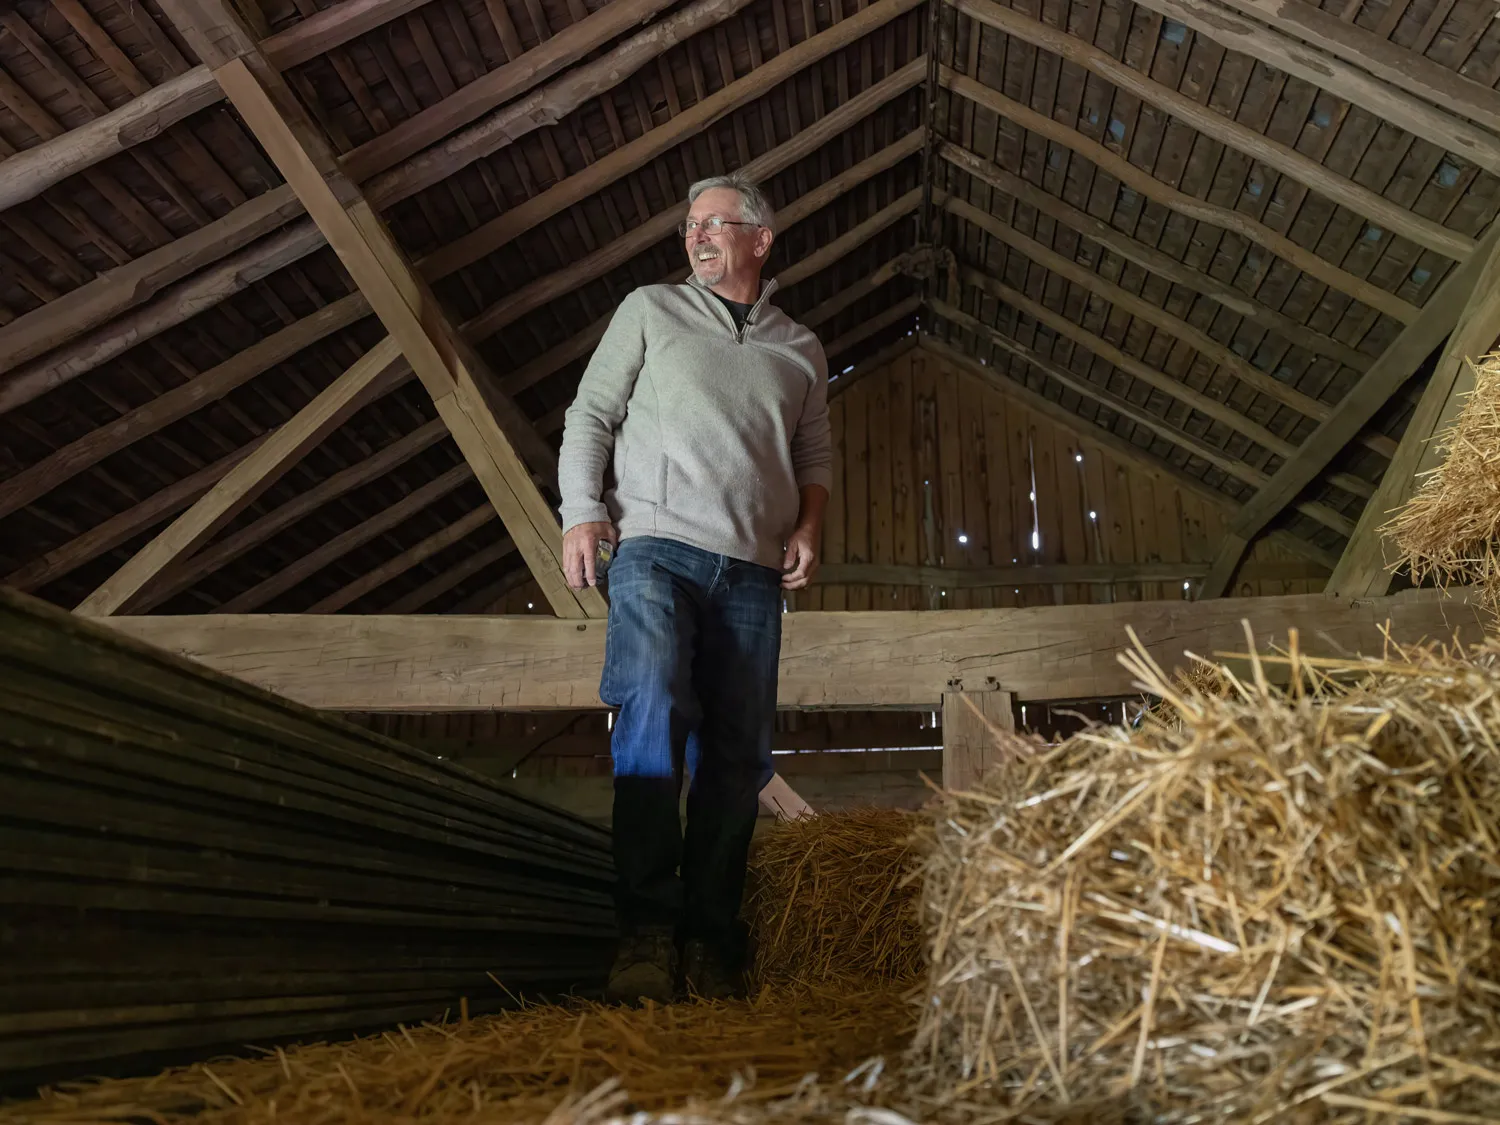 Doug Morgan surveys the loft inside an old barn he plans to dismantle, rebuild and refurbish, giving the old timber a new take on life.